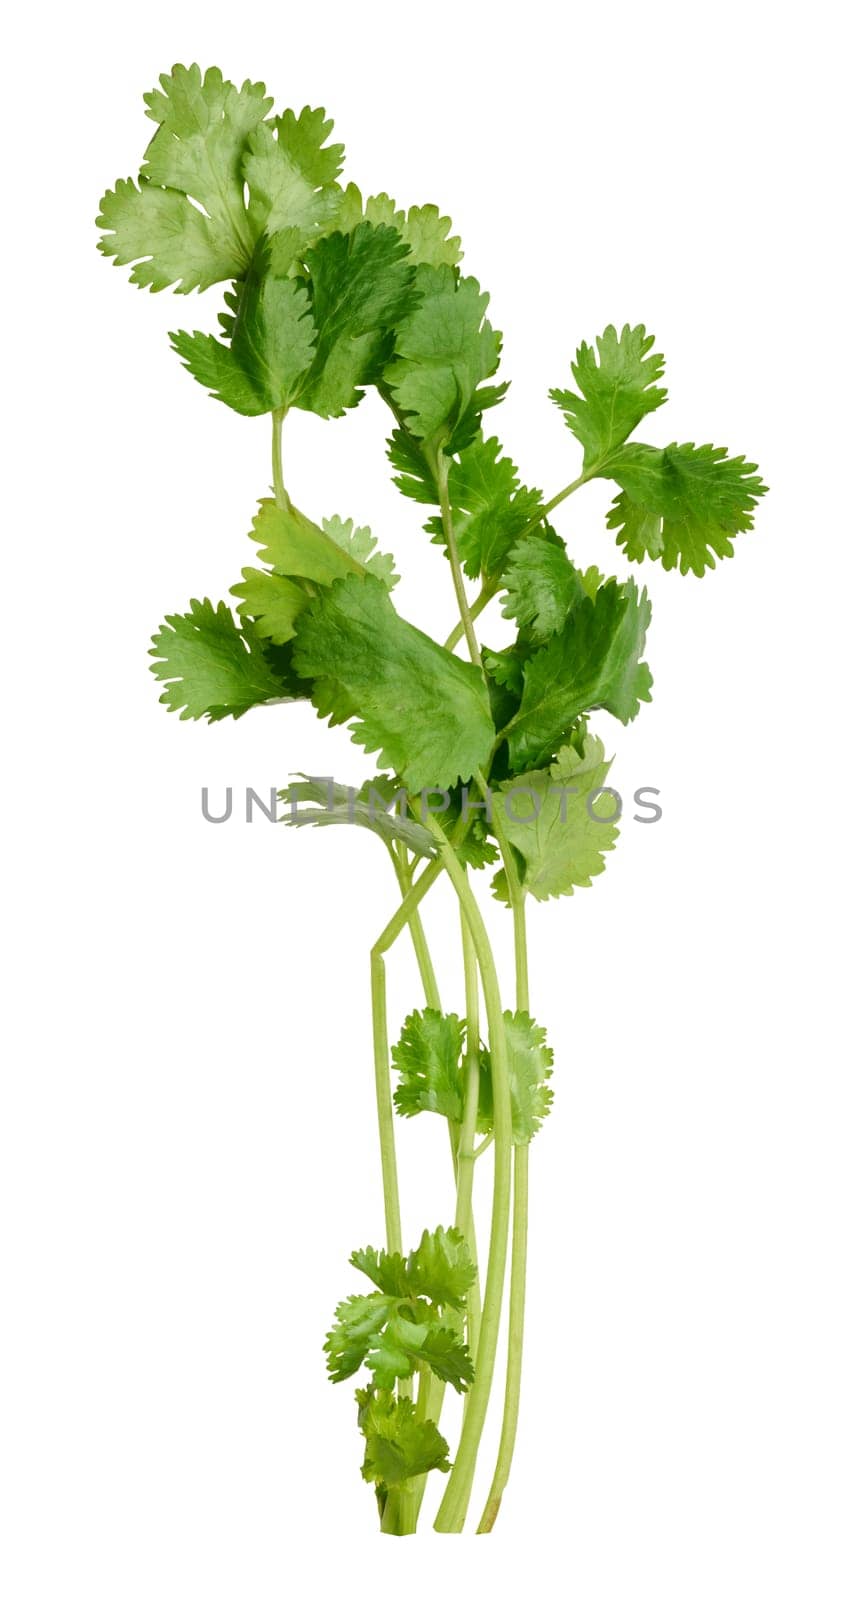 Fresh bunch of cilantro on isolated background, spice